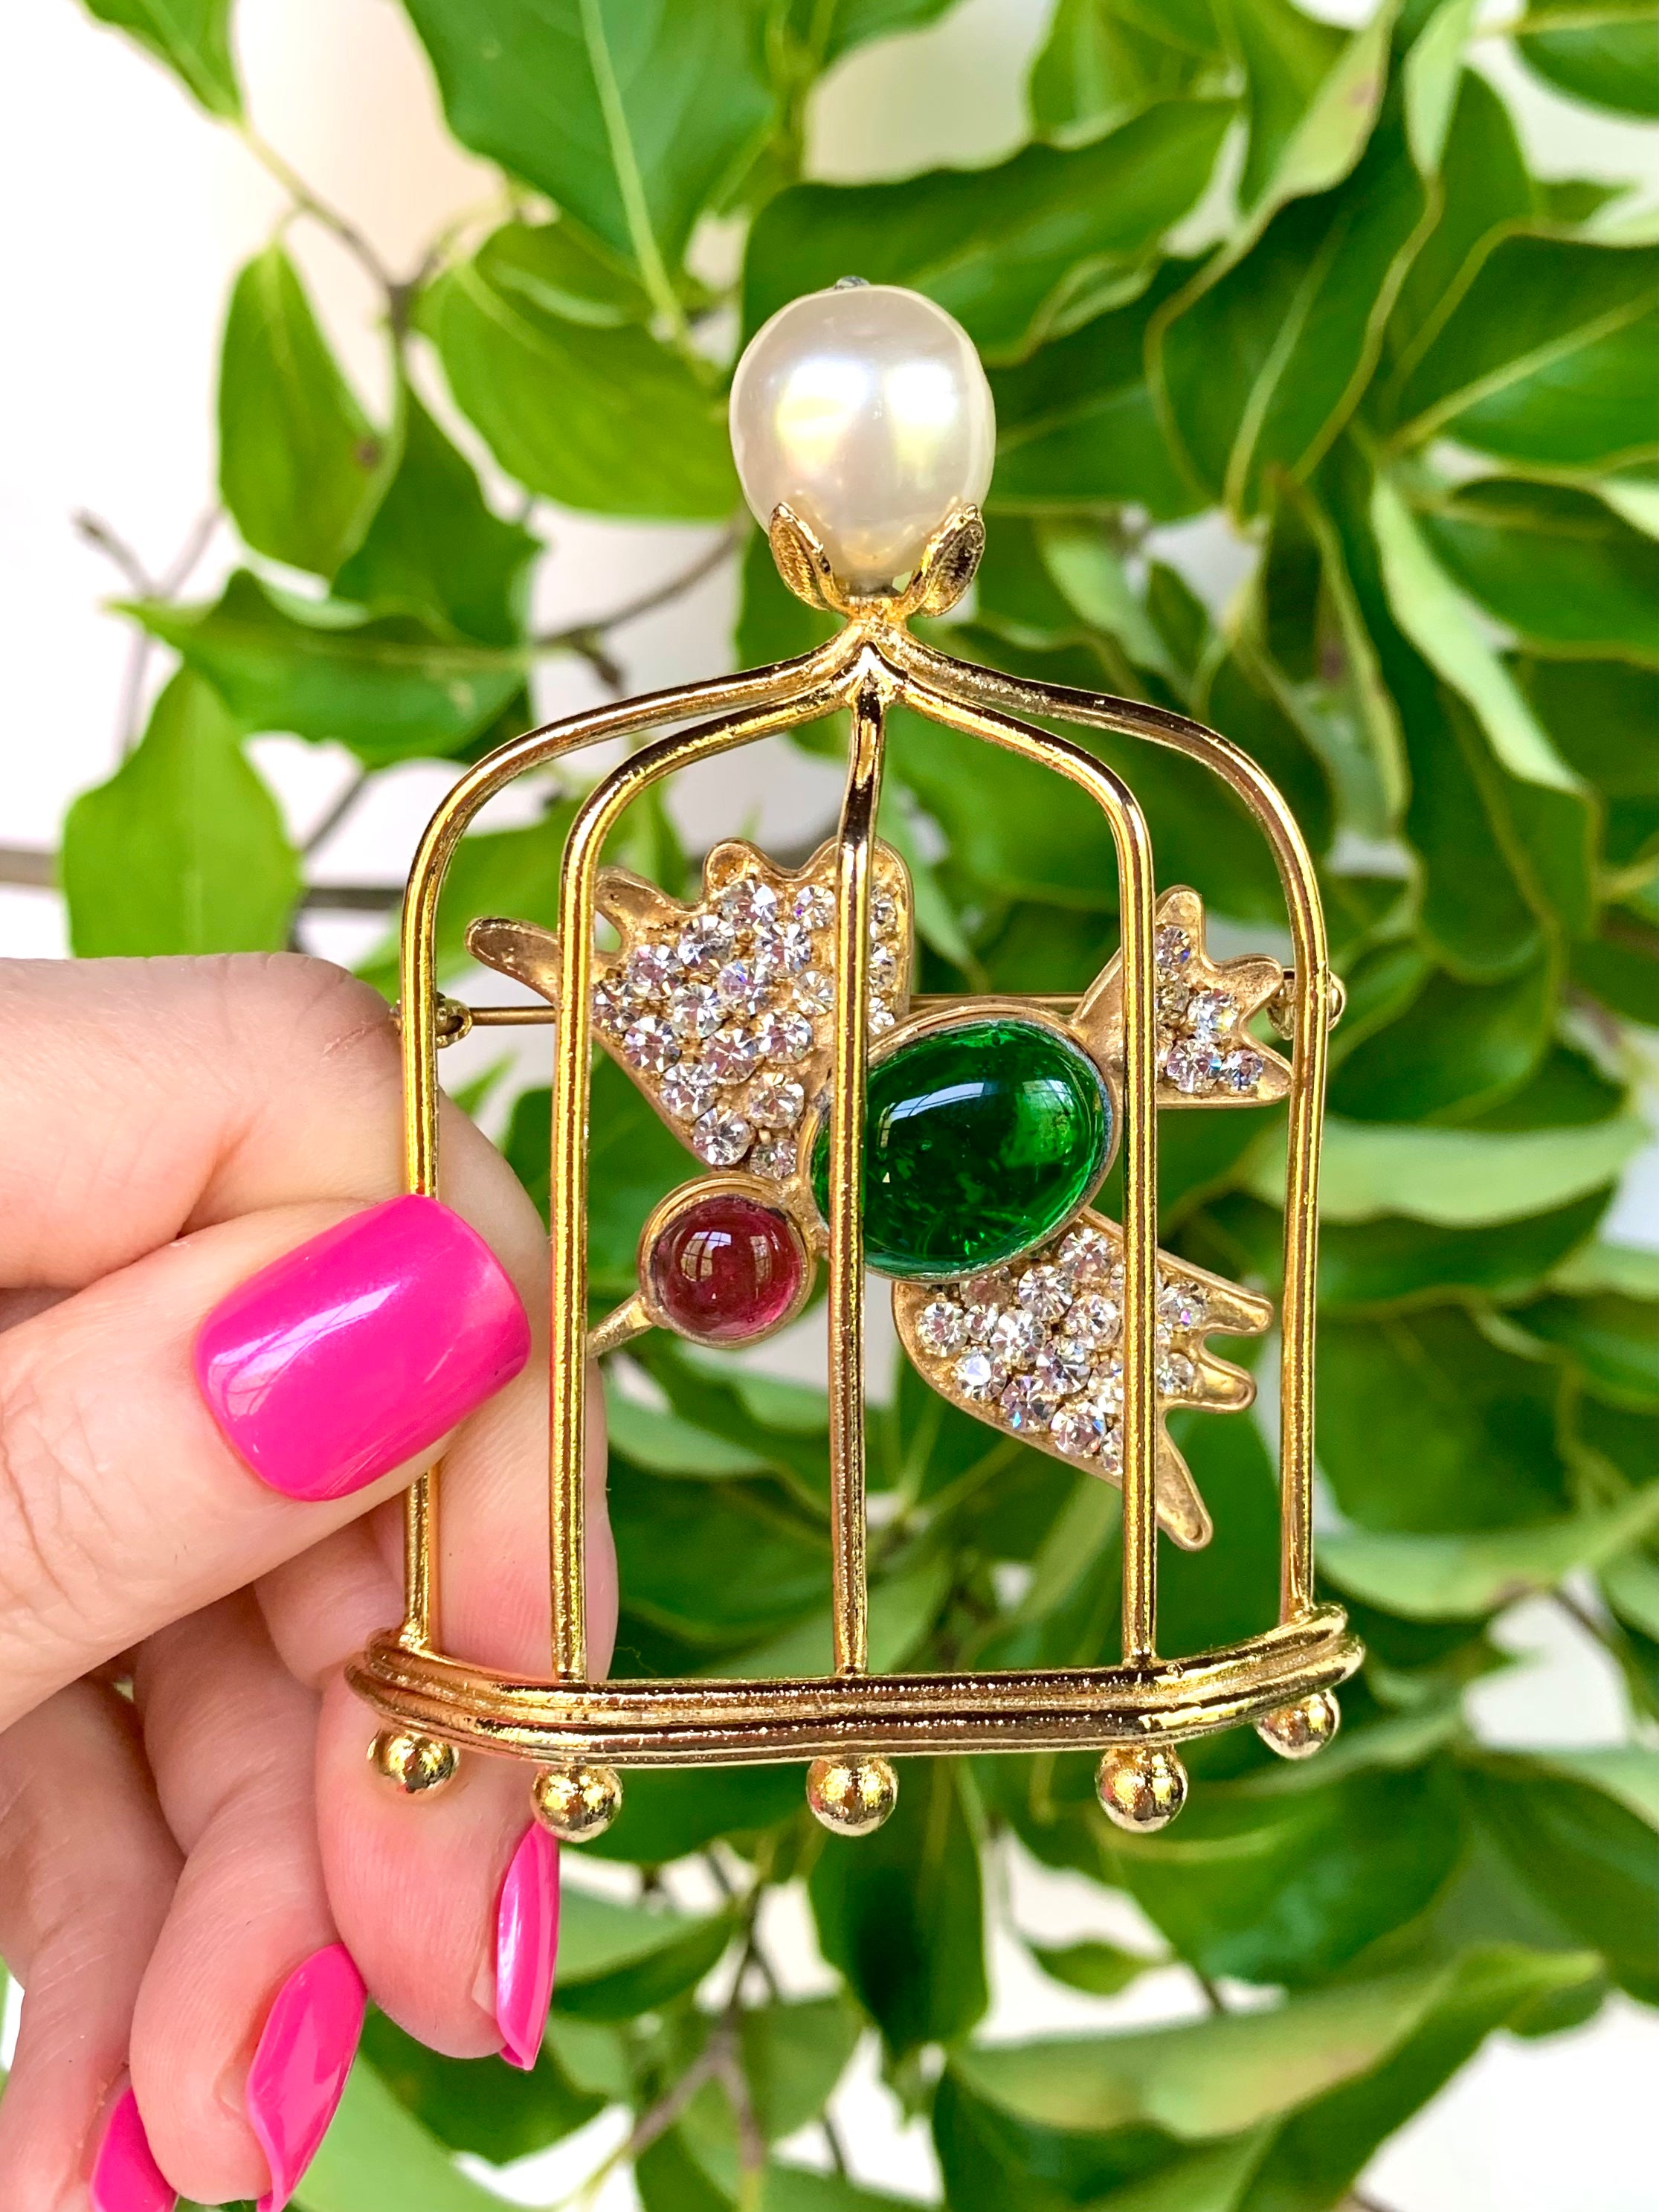 Authentic CHANEL Brooch Birdcage 2021 Act 1 B21